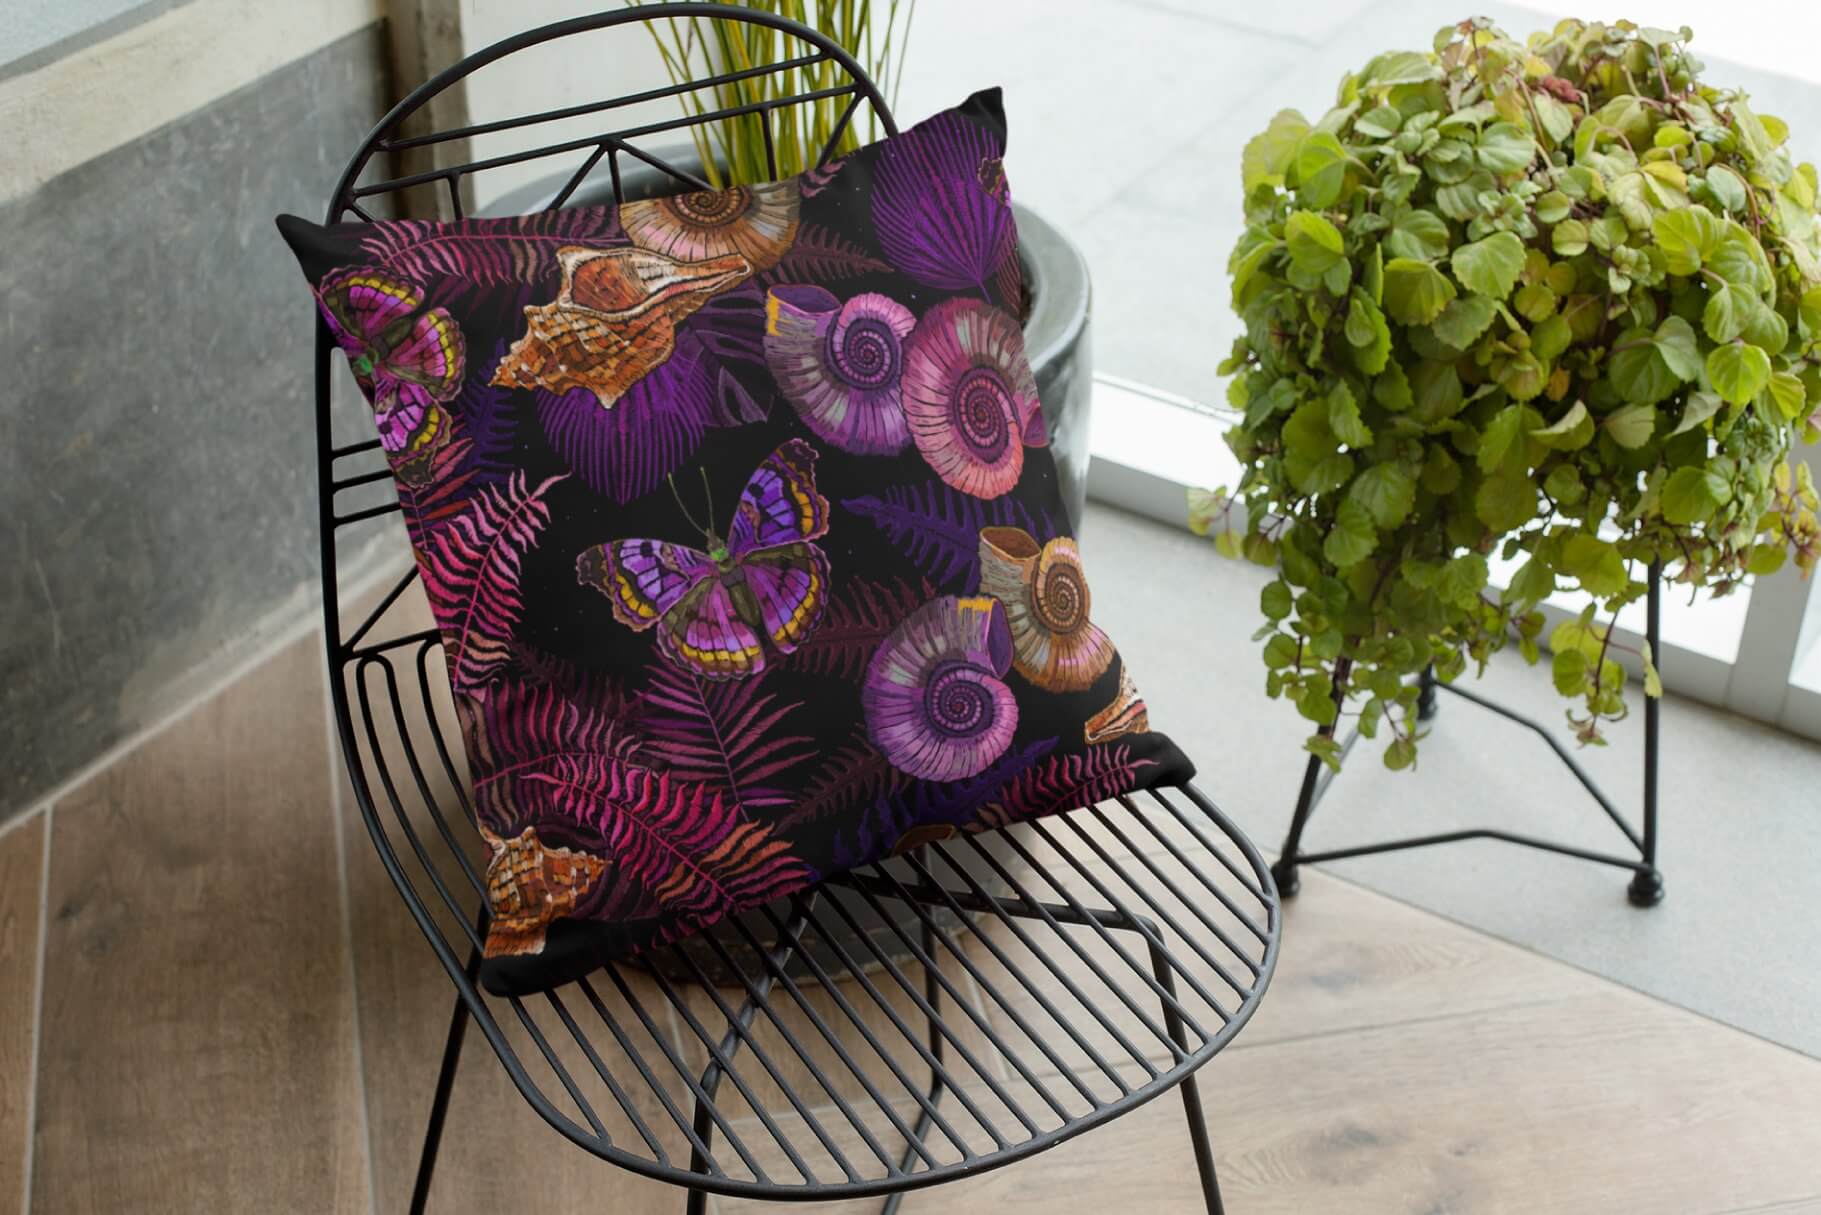 A black cushion with dark pink and purple prints on an iron chair.